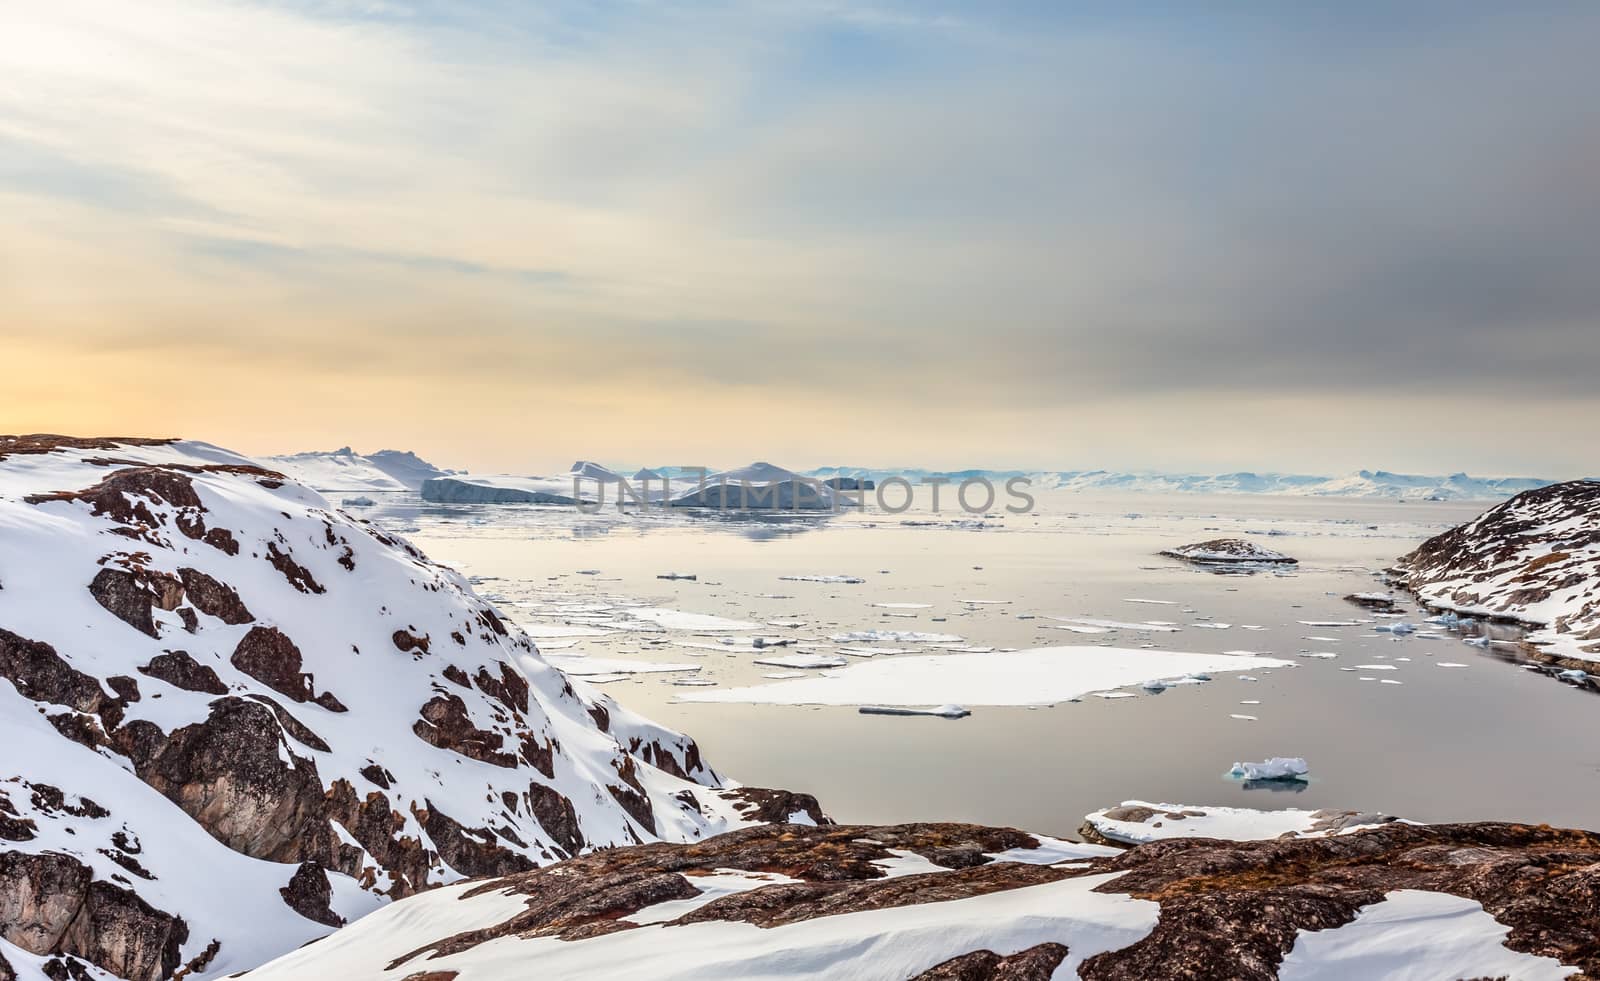 Ice fields and drifting Icebergs at the Ilulissat fjord, North Greenland